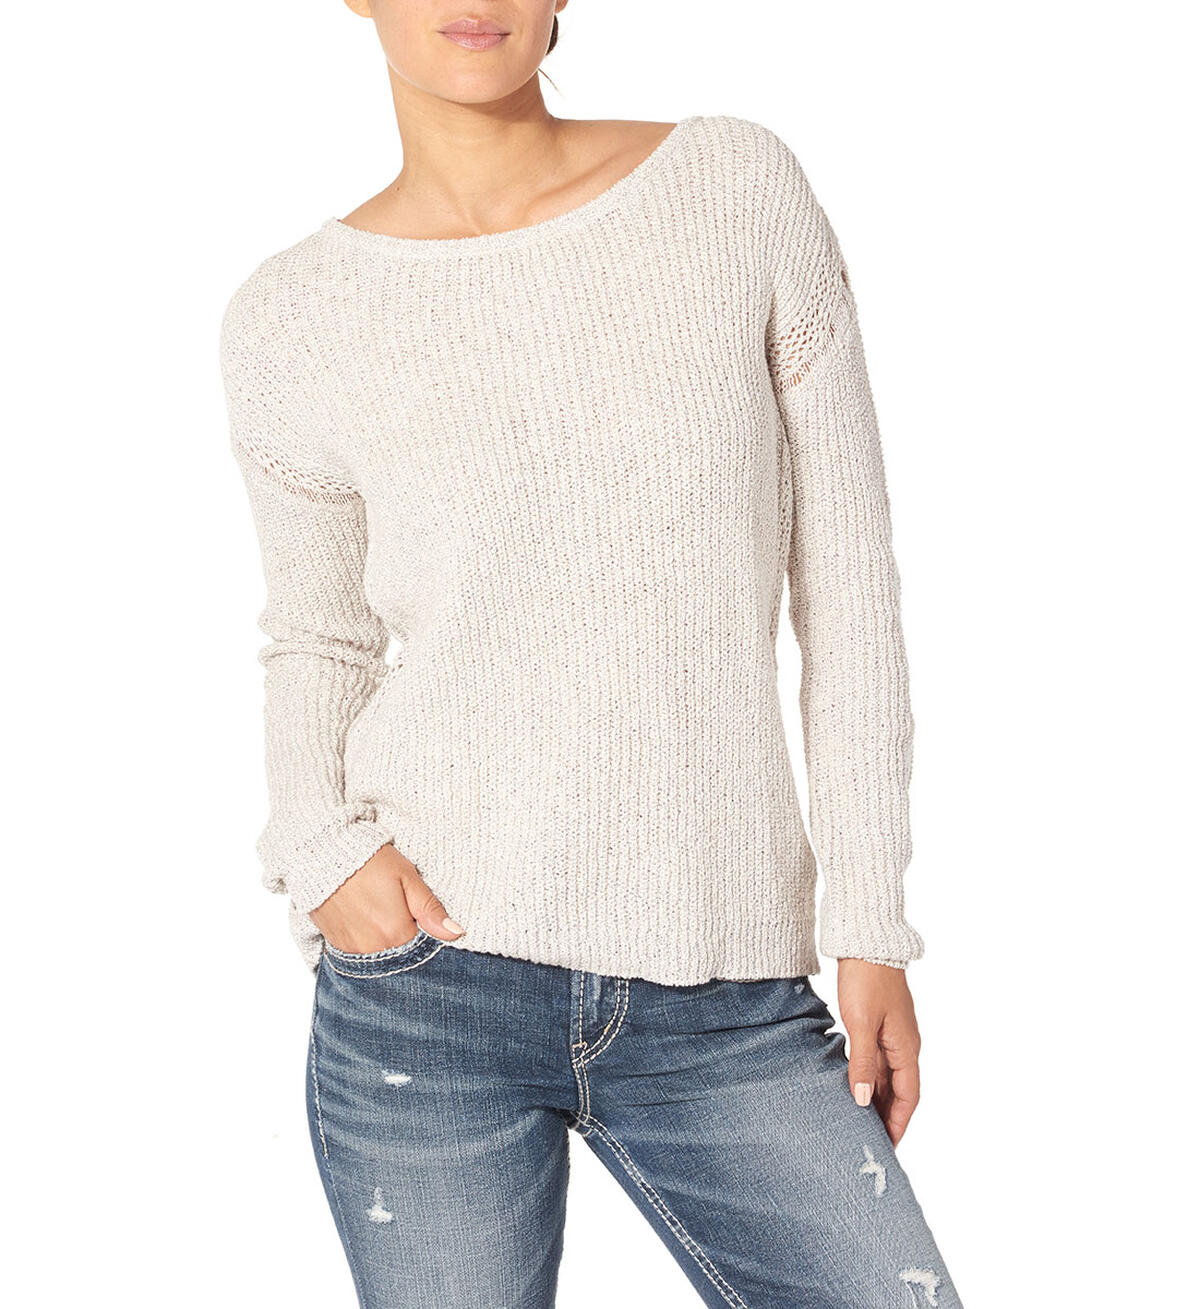 Boxy Sweater with Open Knit Detail, , hi-res image number 0